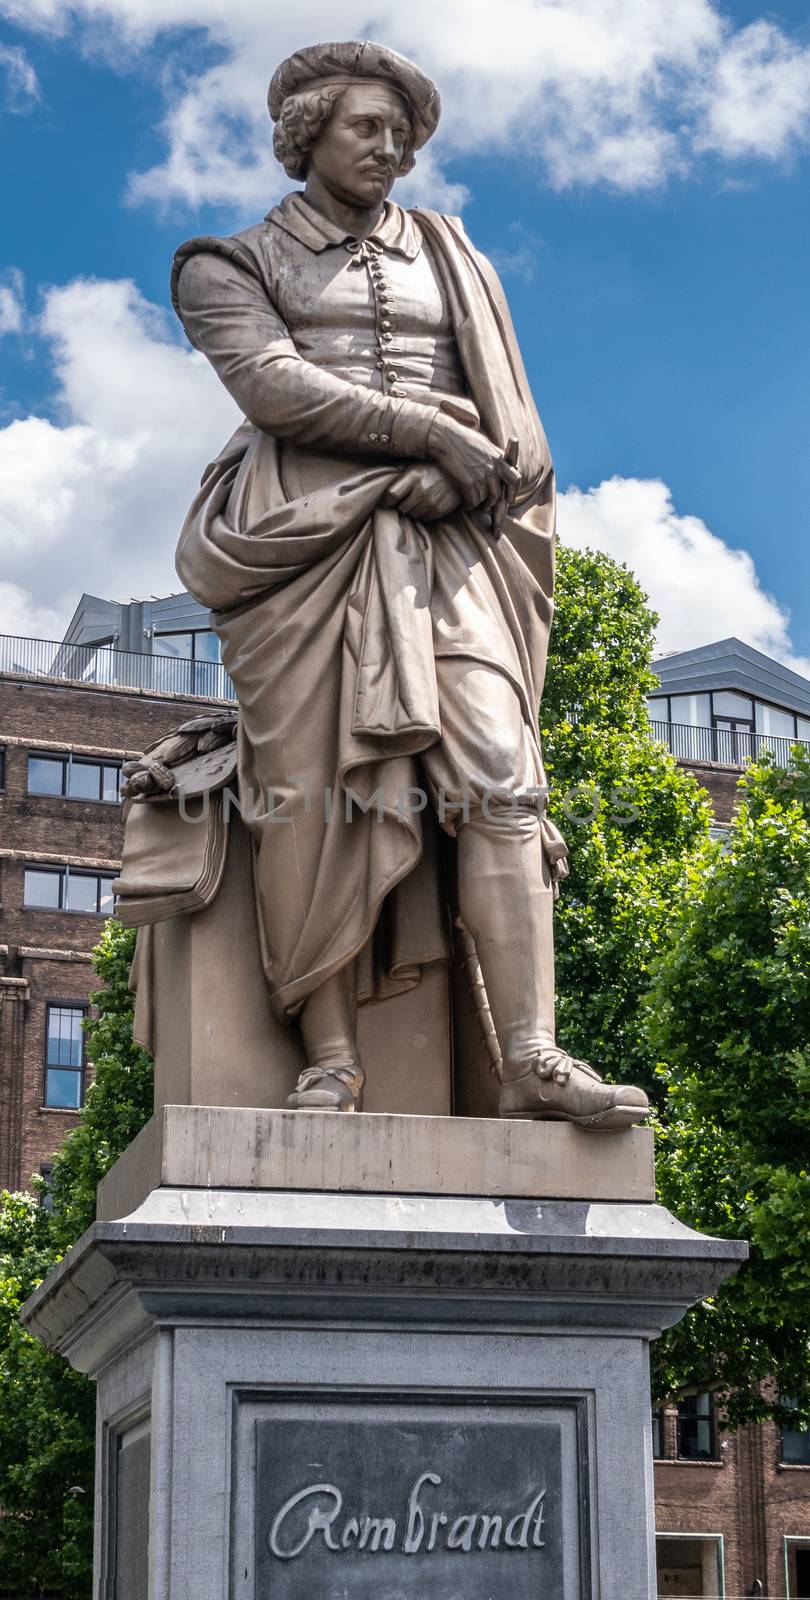 Amsterdam, the Netherlands - July 1, 2019: Beige full body of Rembrandt van Rijn on pedestal with his name statue on Rembrandtplein under blue sky with white clouds. tall buildings in back.